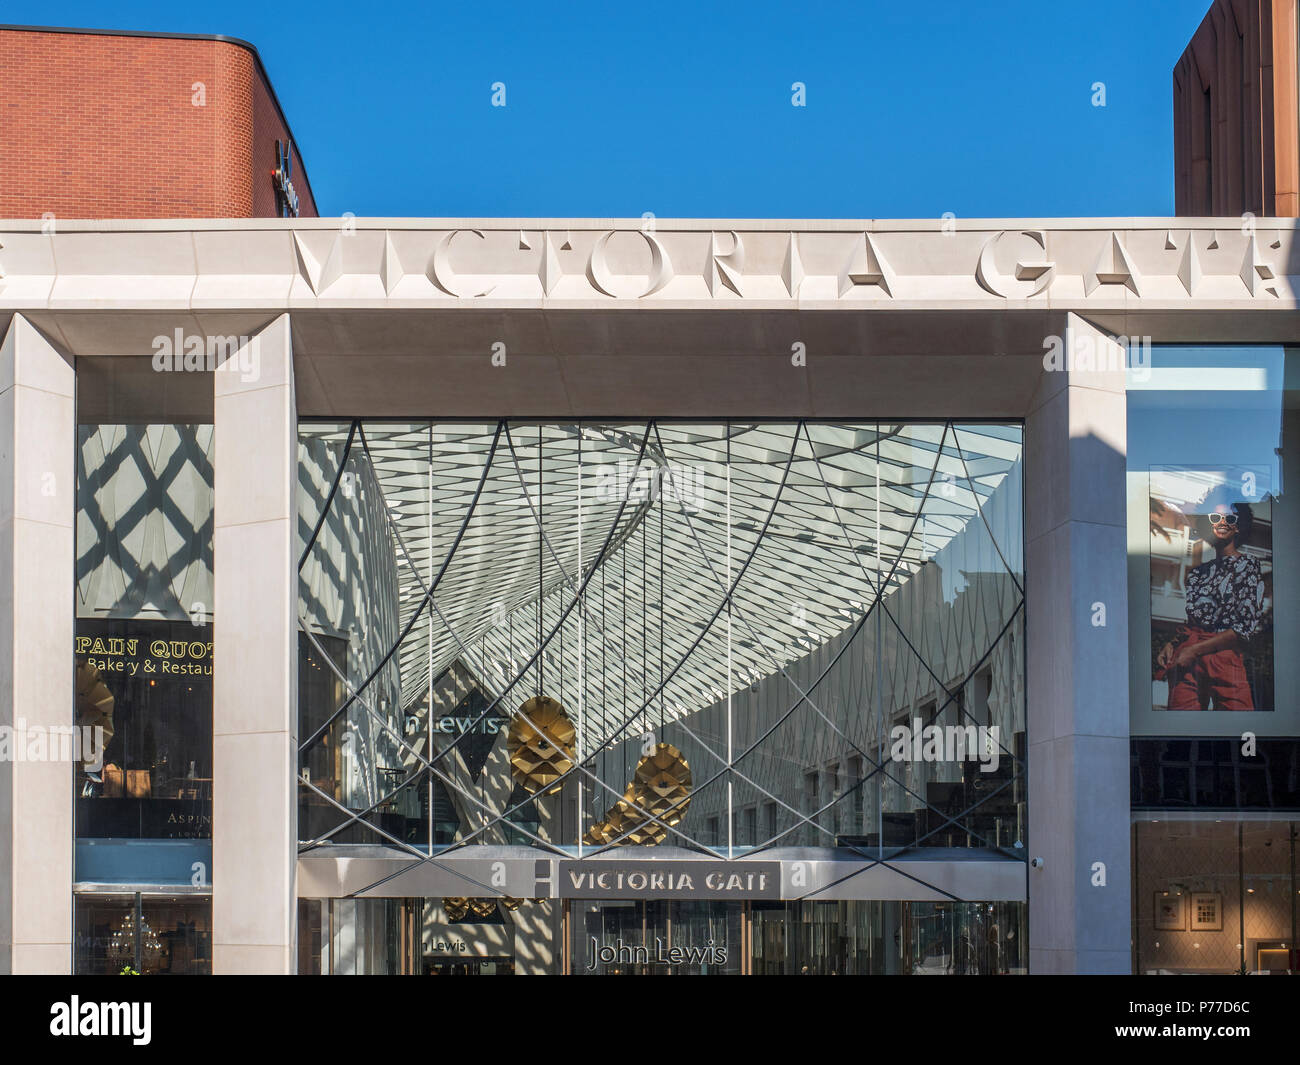 Victoria Gate modern shopping centre in Leeds West Yorkshire England Stock Photo